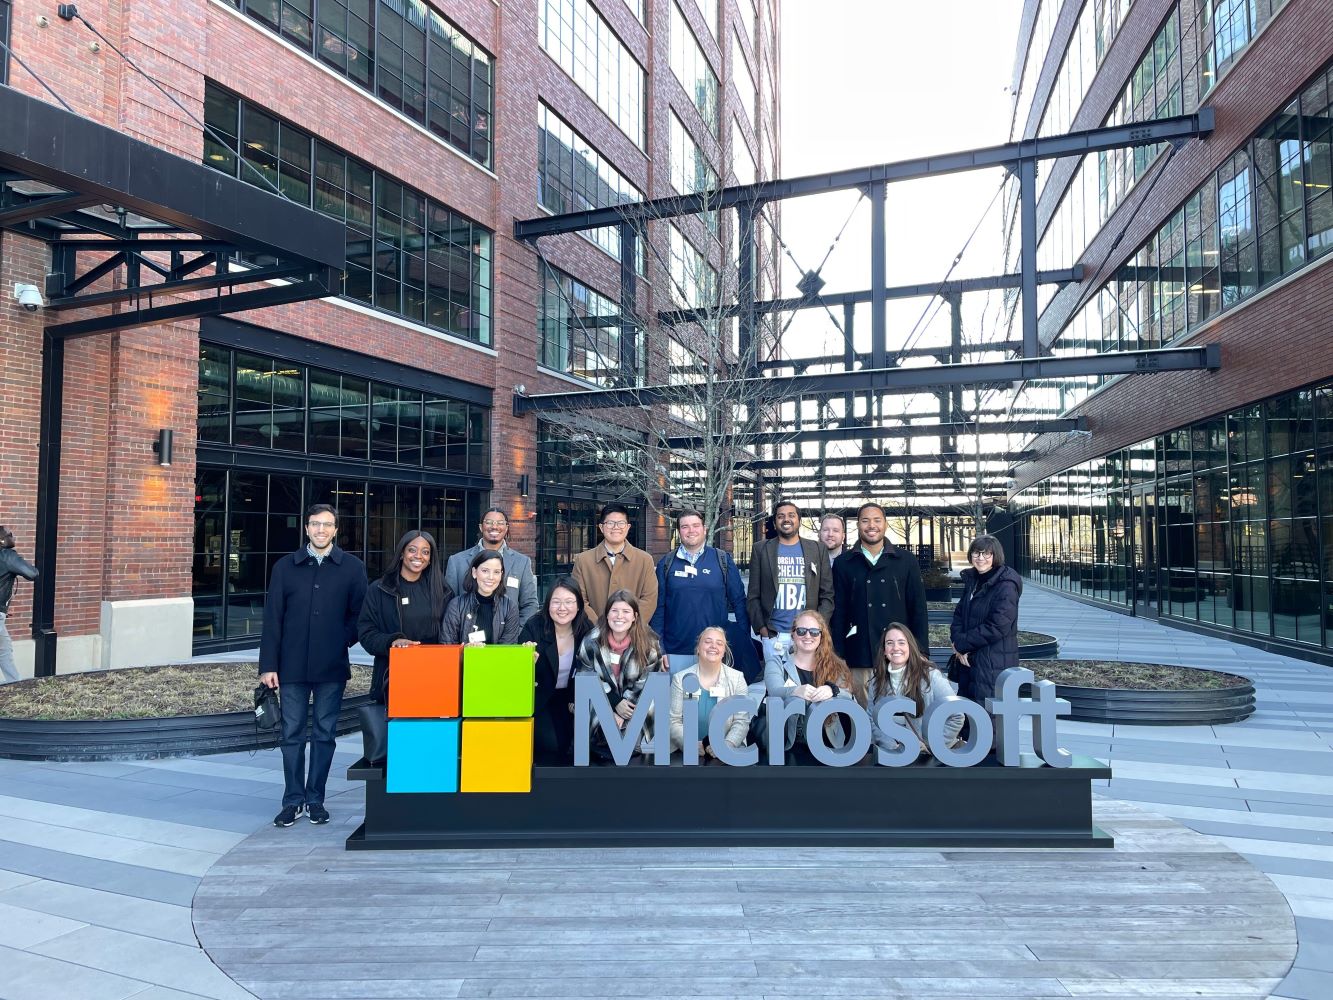 Students beside the Microsoft sign